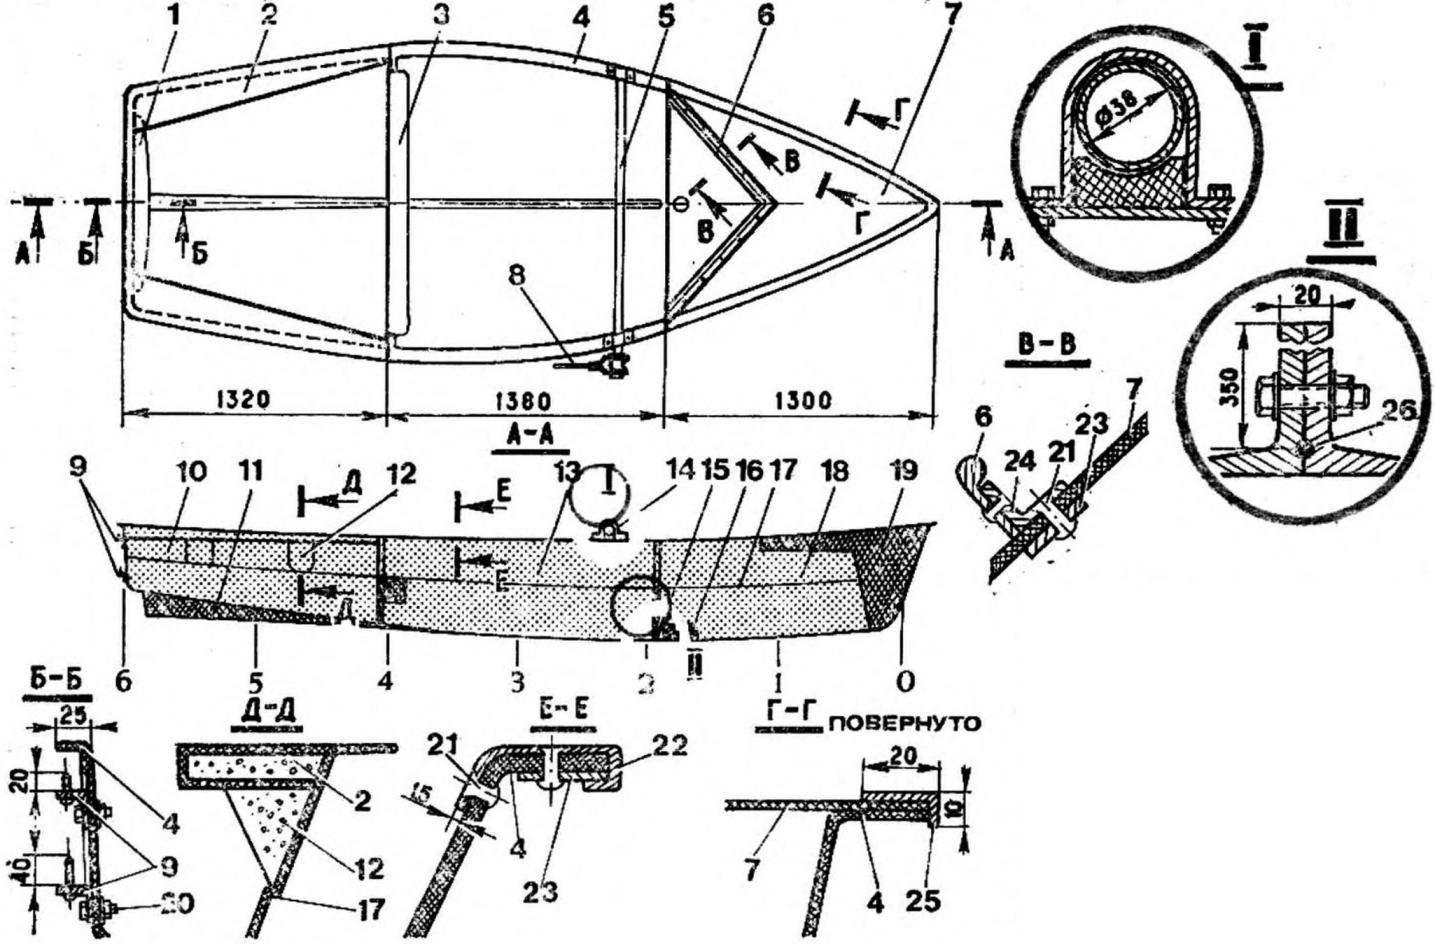 Fig. 2. The hull of the Dinghy